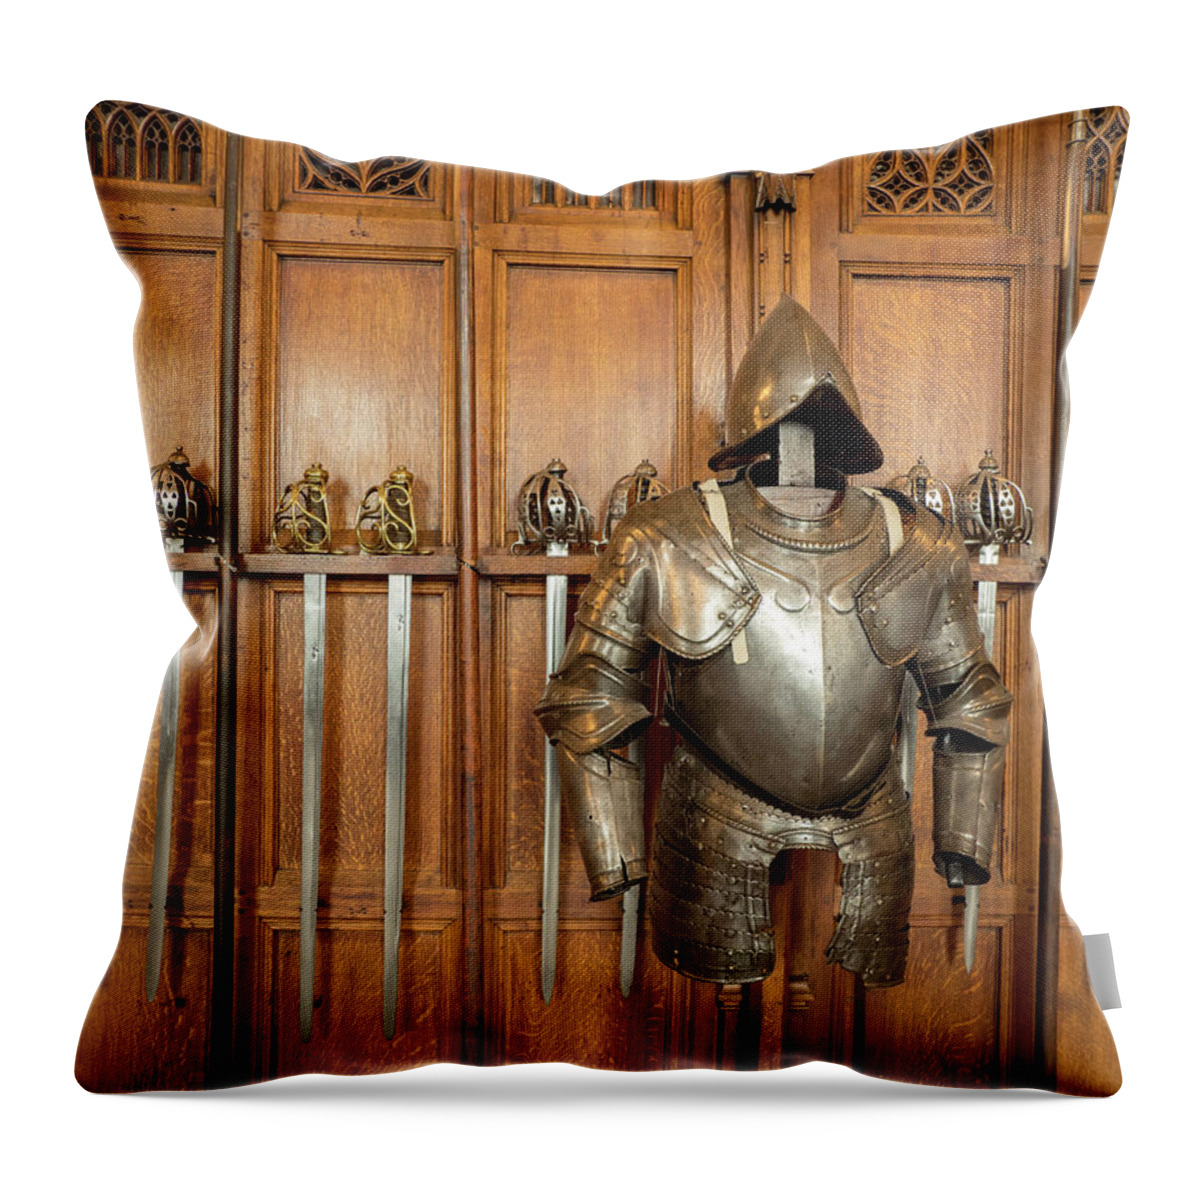 Defensive Throw Pillow featuring the photograph Defensive Decoration by Jean Noren